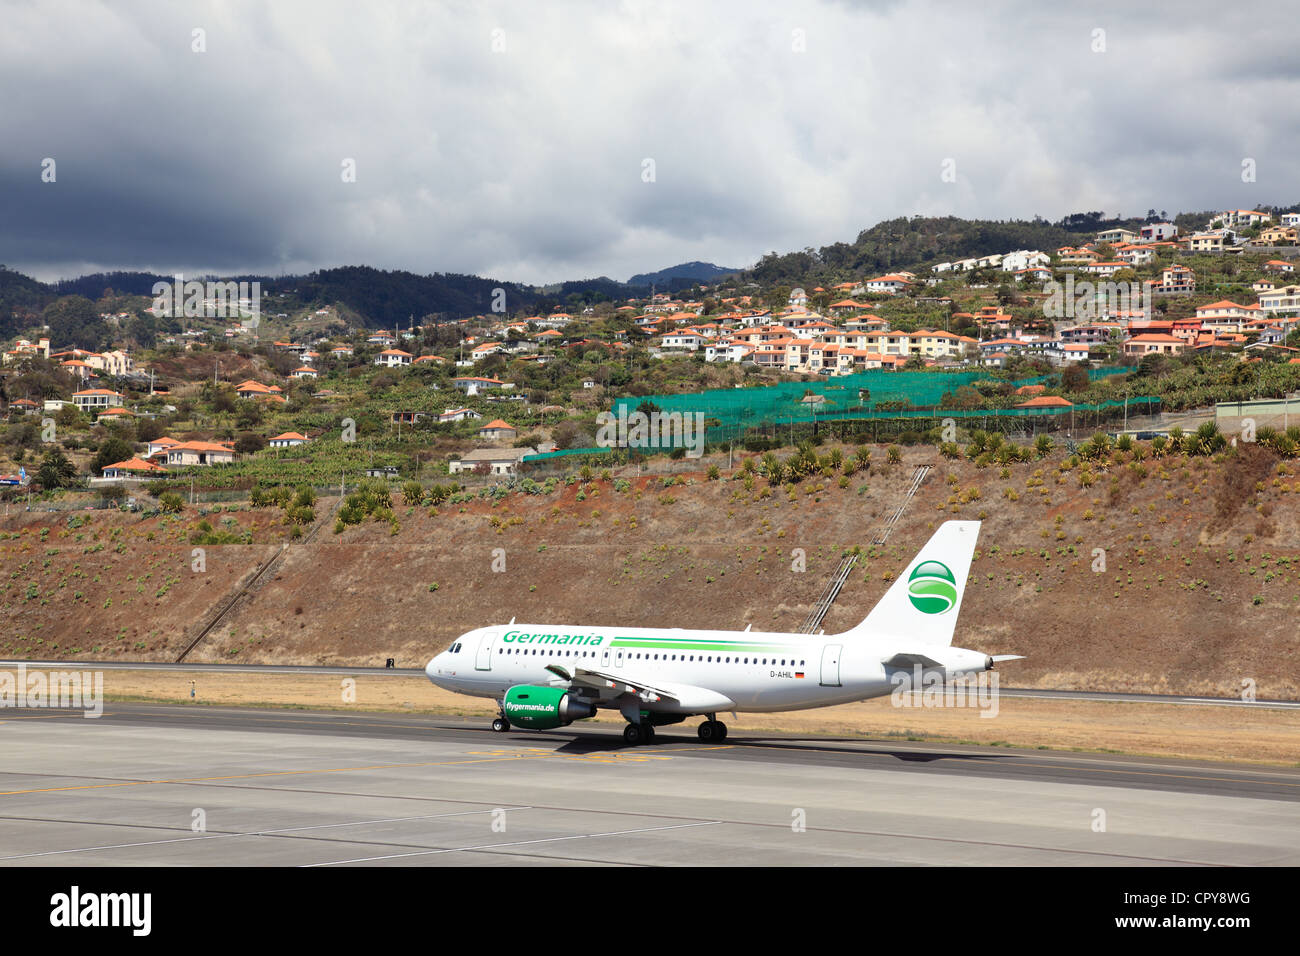 Germanair charter aircraft on runway at Funchal Airport  FNC, Madeira, Portugal, Europe. Photo by Willy Matheisl Stock Photo